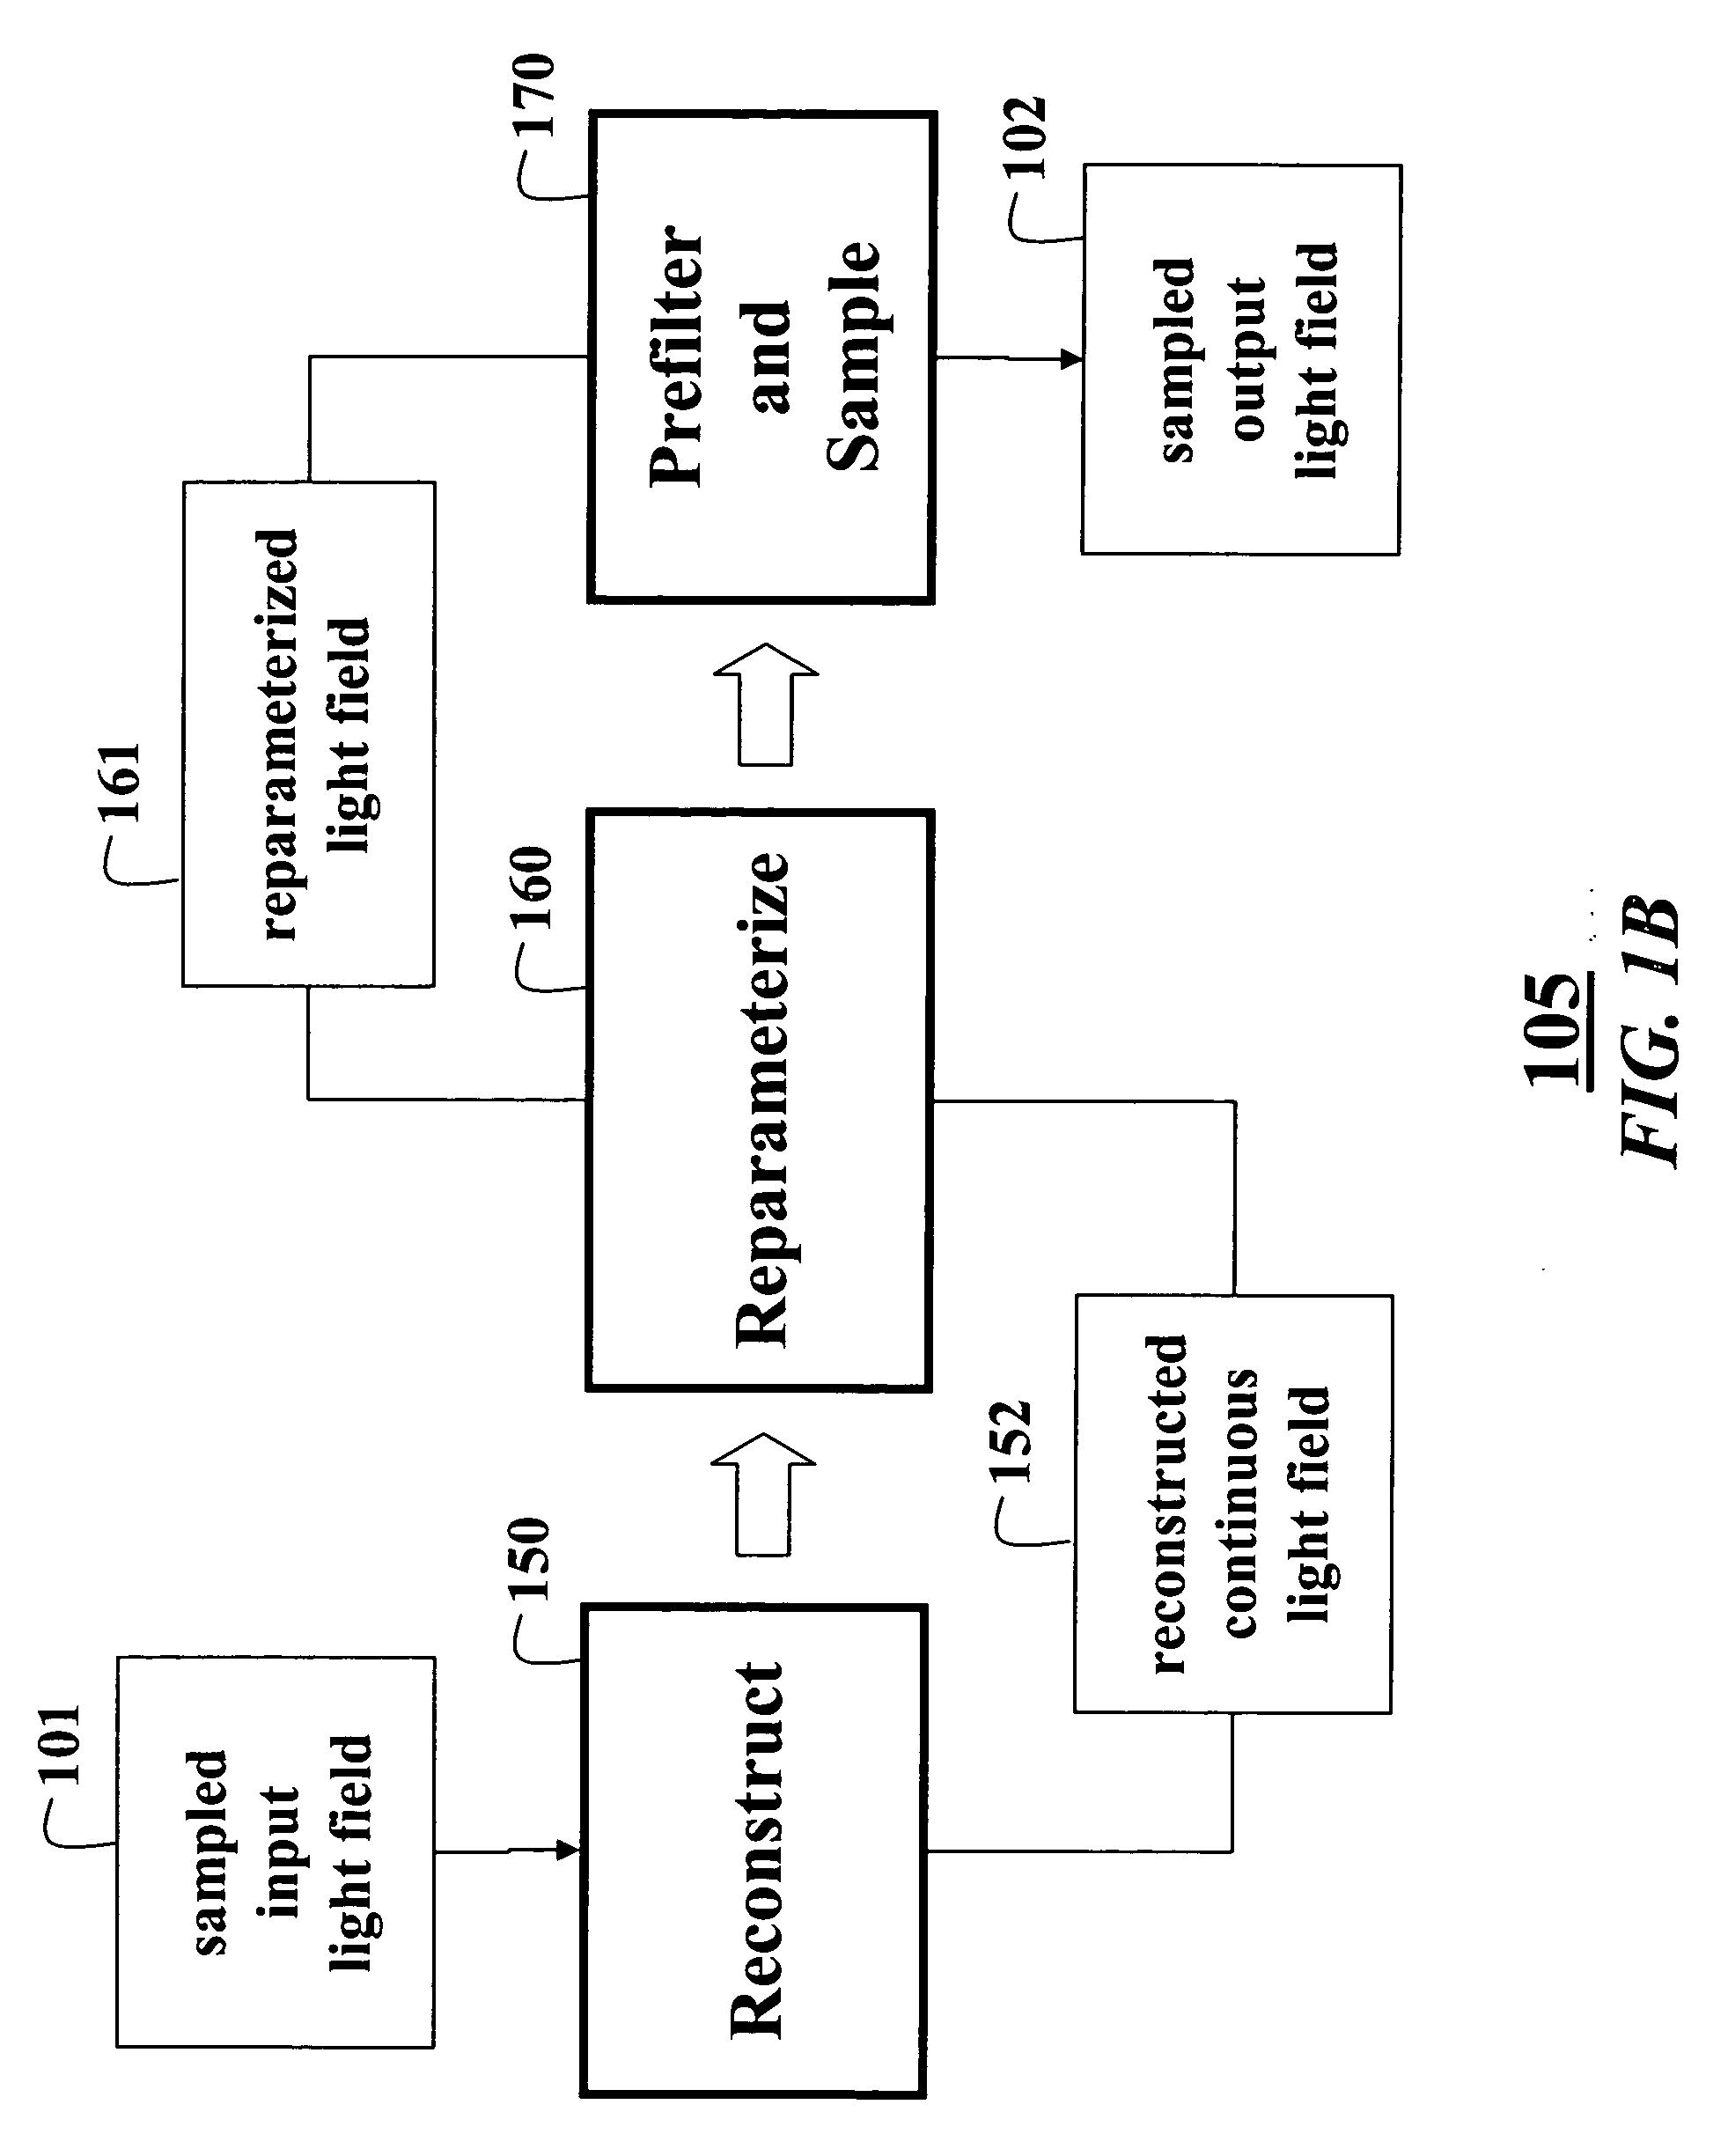 Method and system for acquiring and displaying 3D light fields